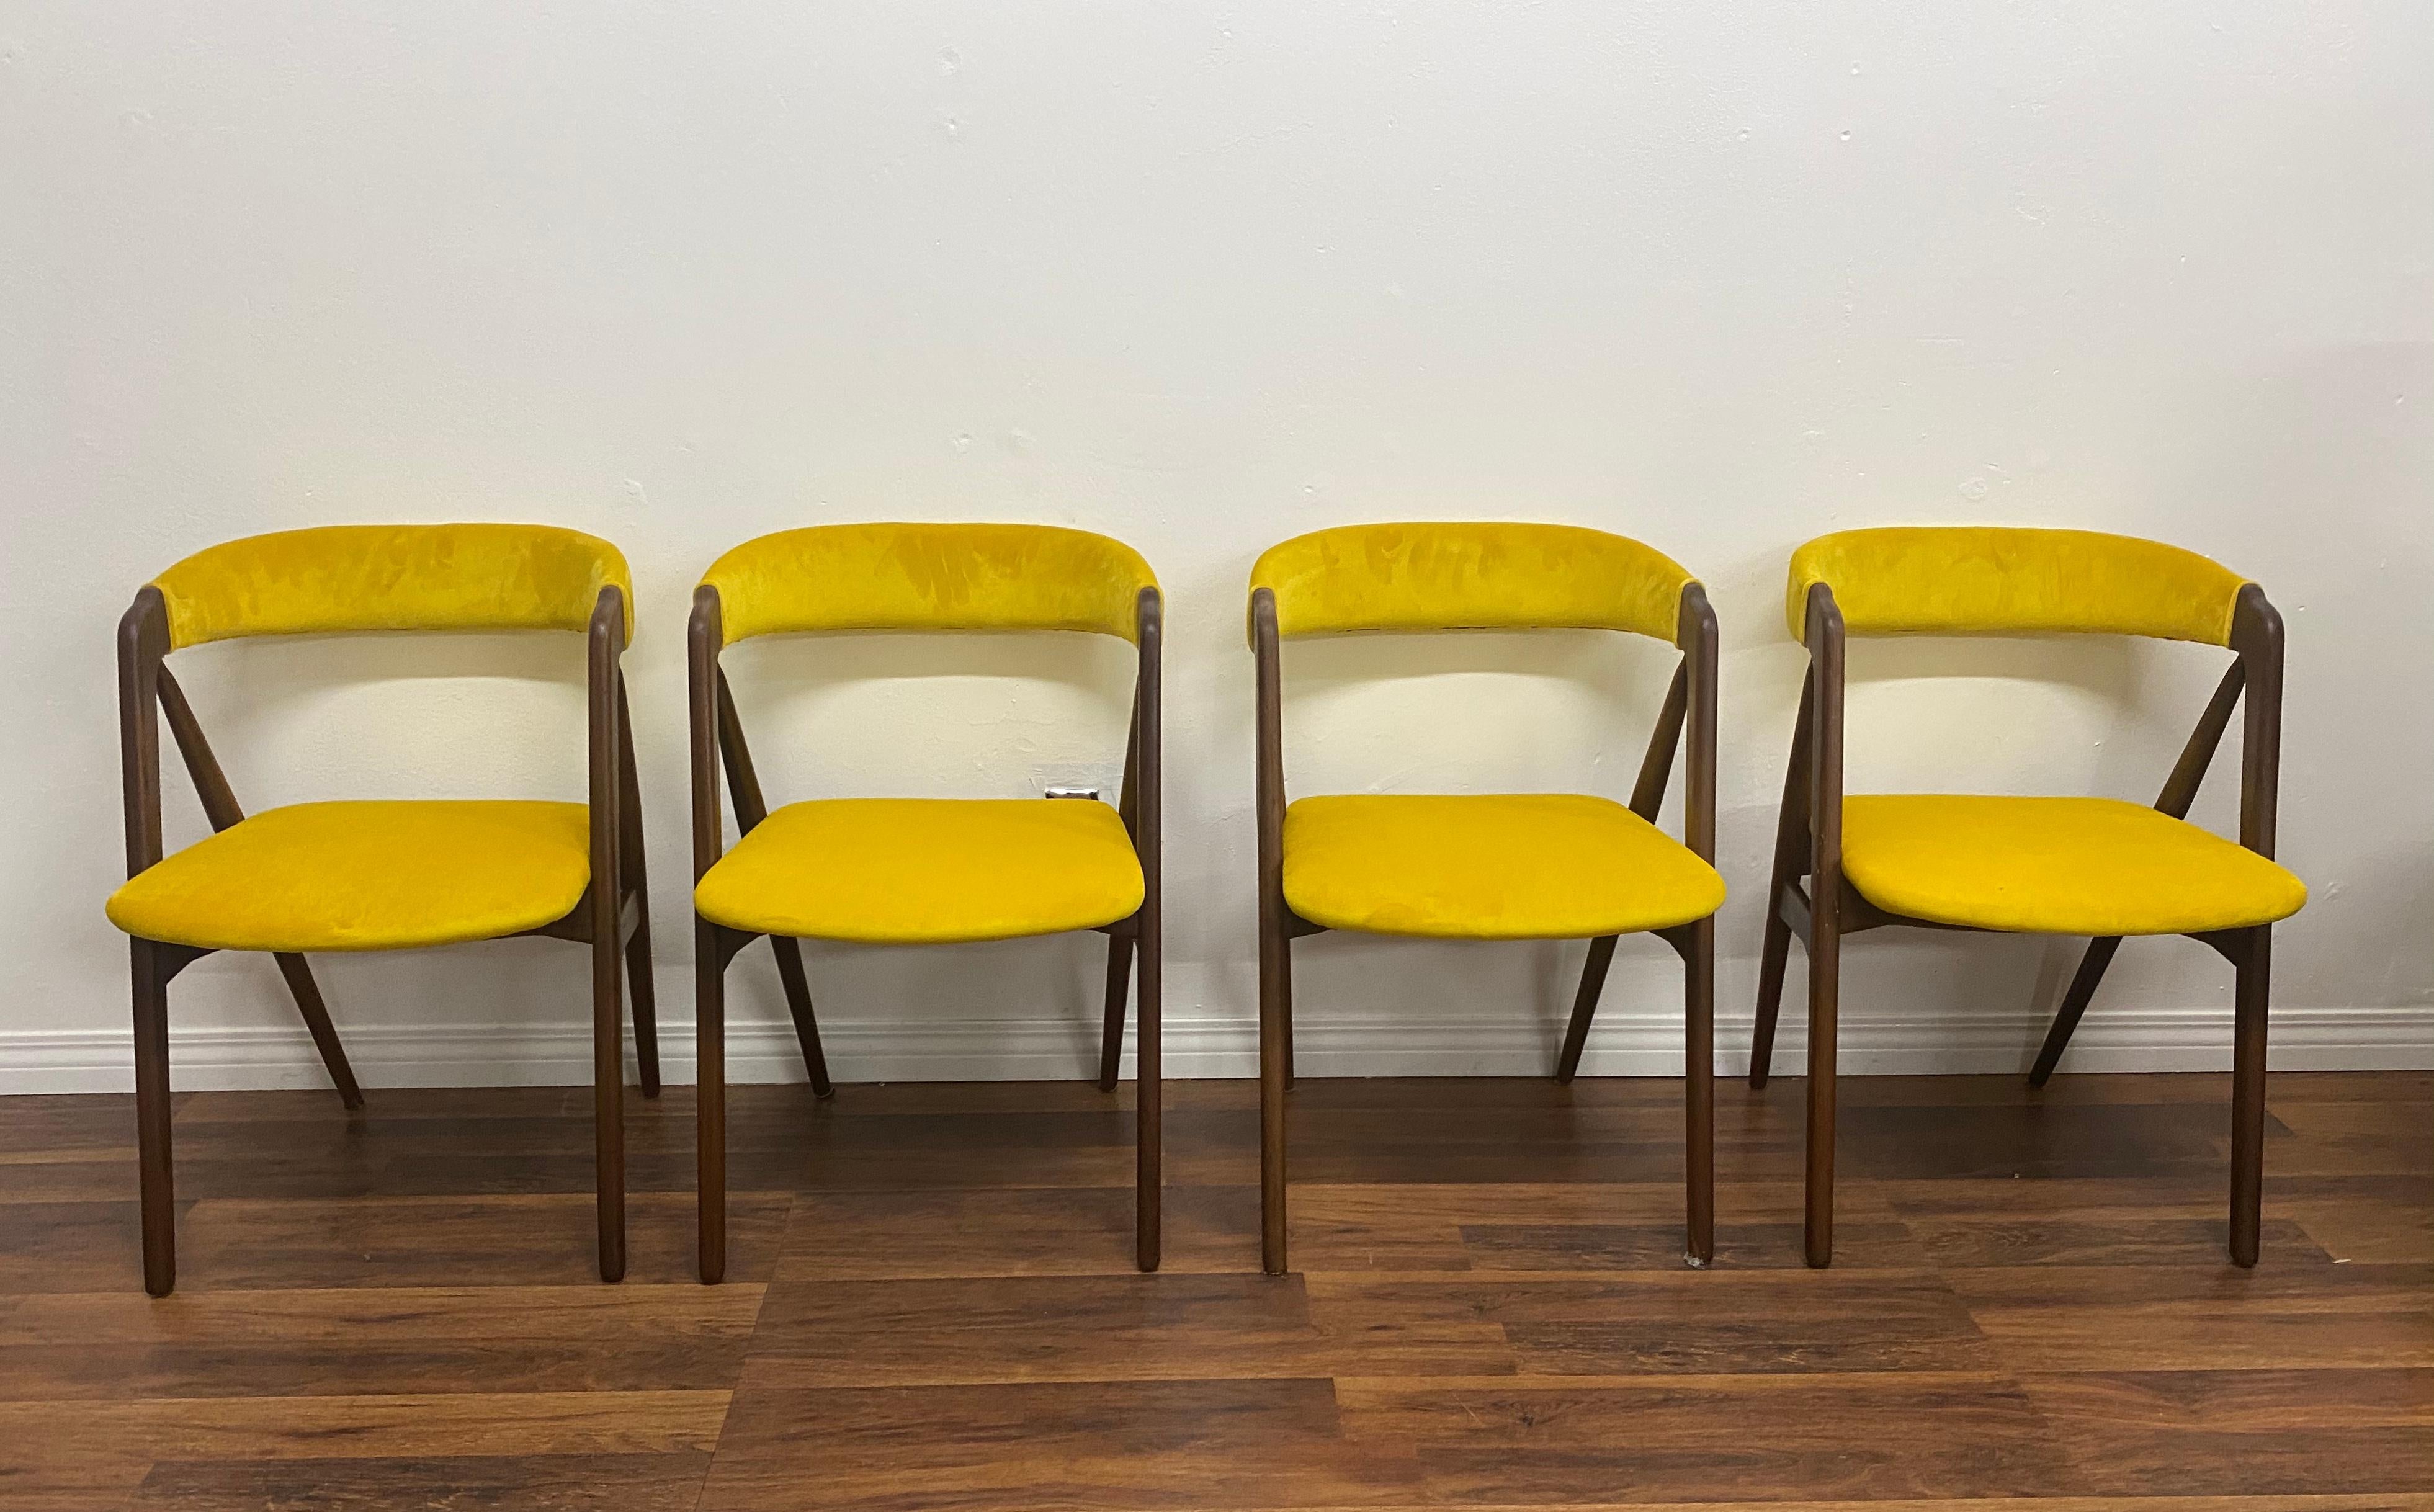 Set of 4 teak dining chairs by Kai Kristiansen, newly reupholstered in yellow velvet.